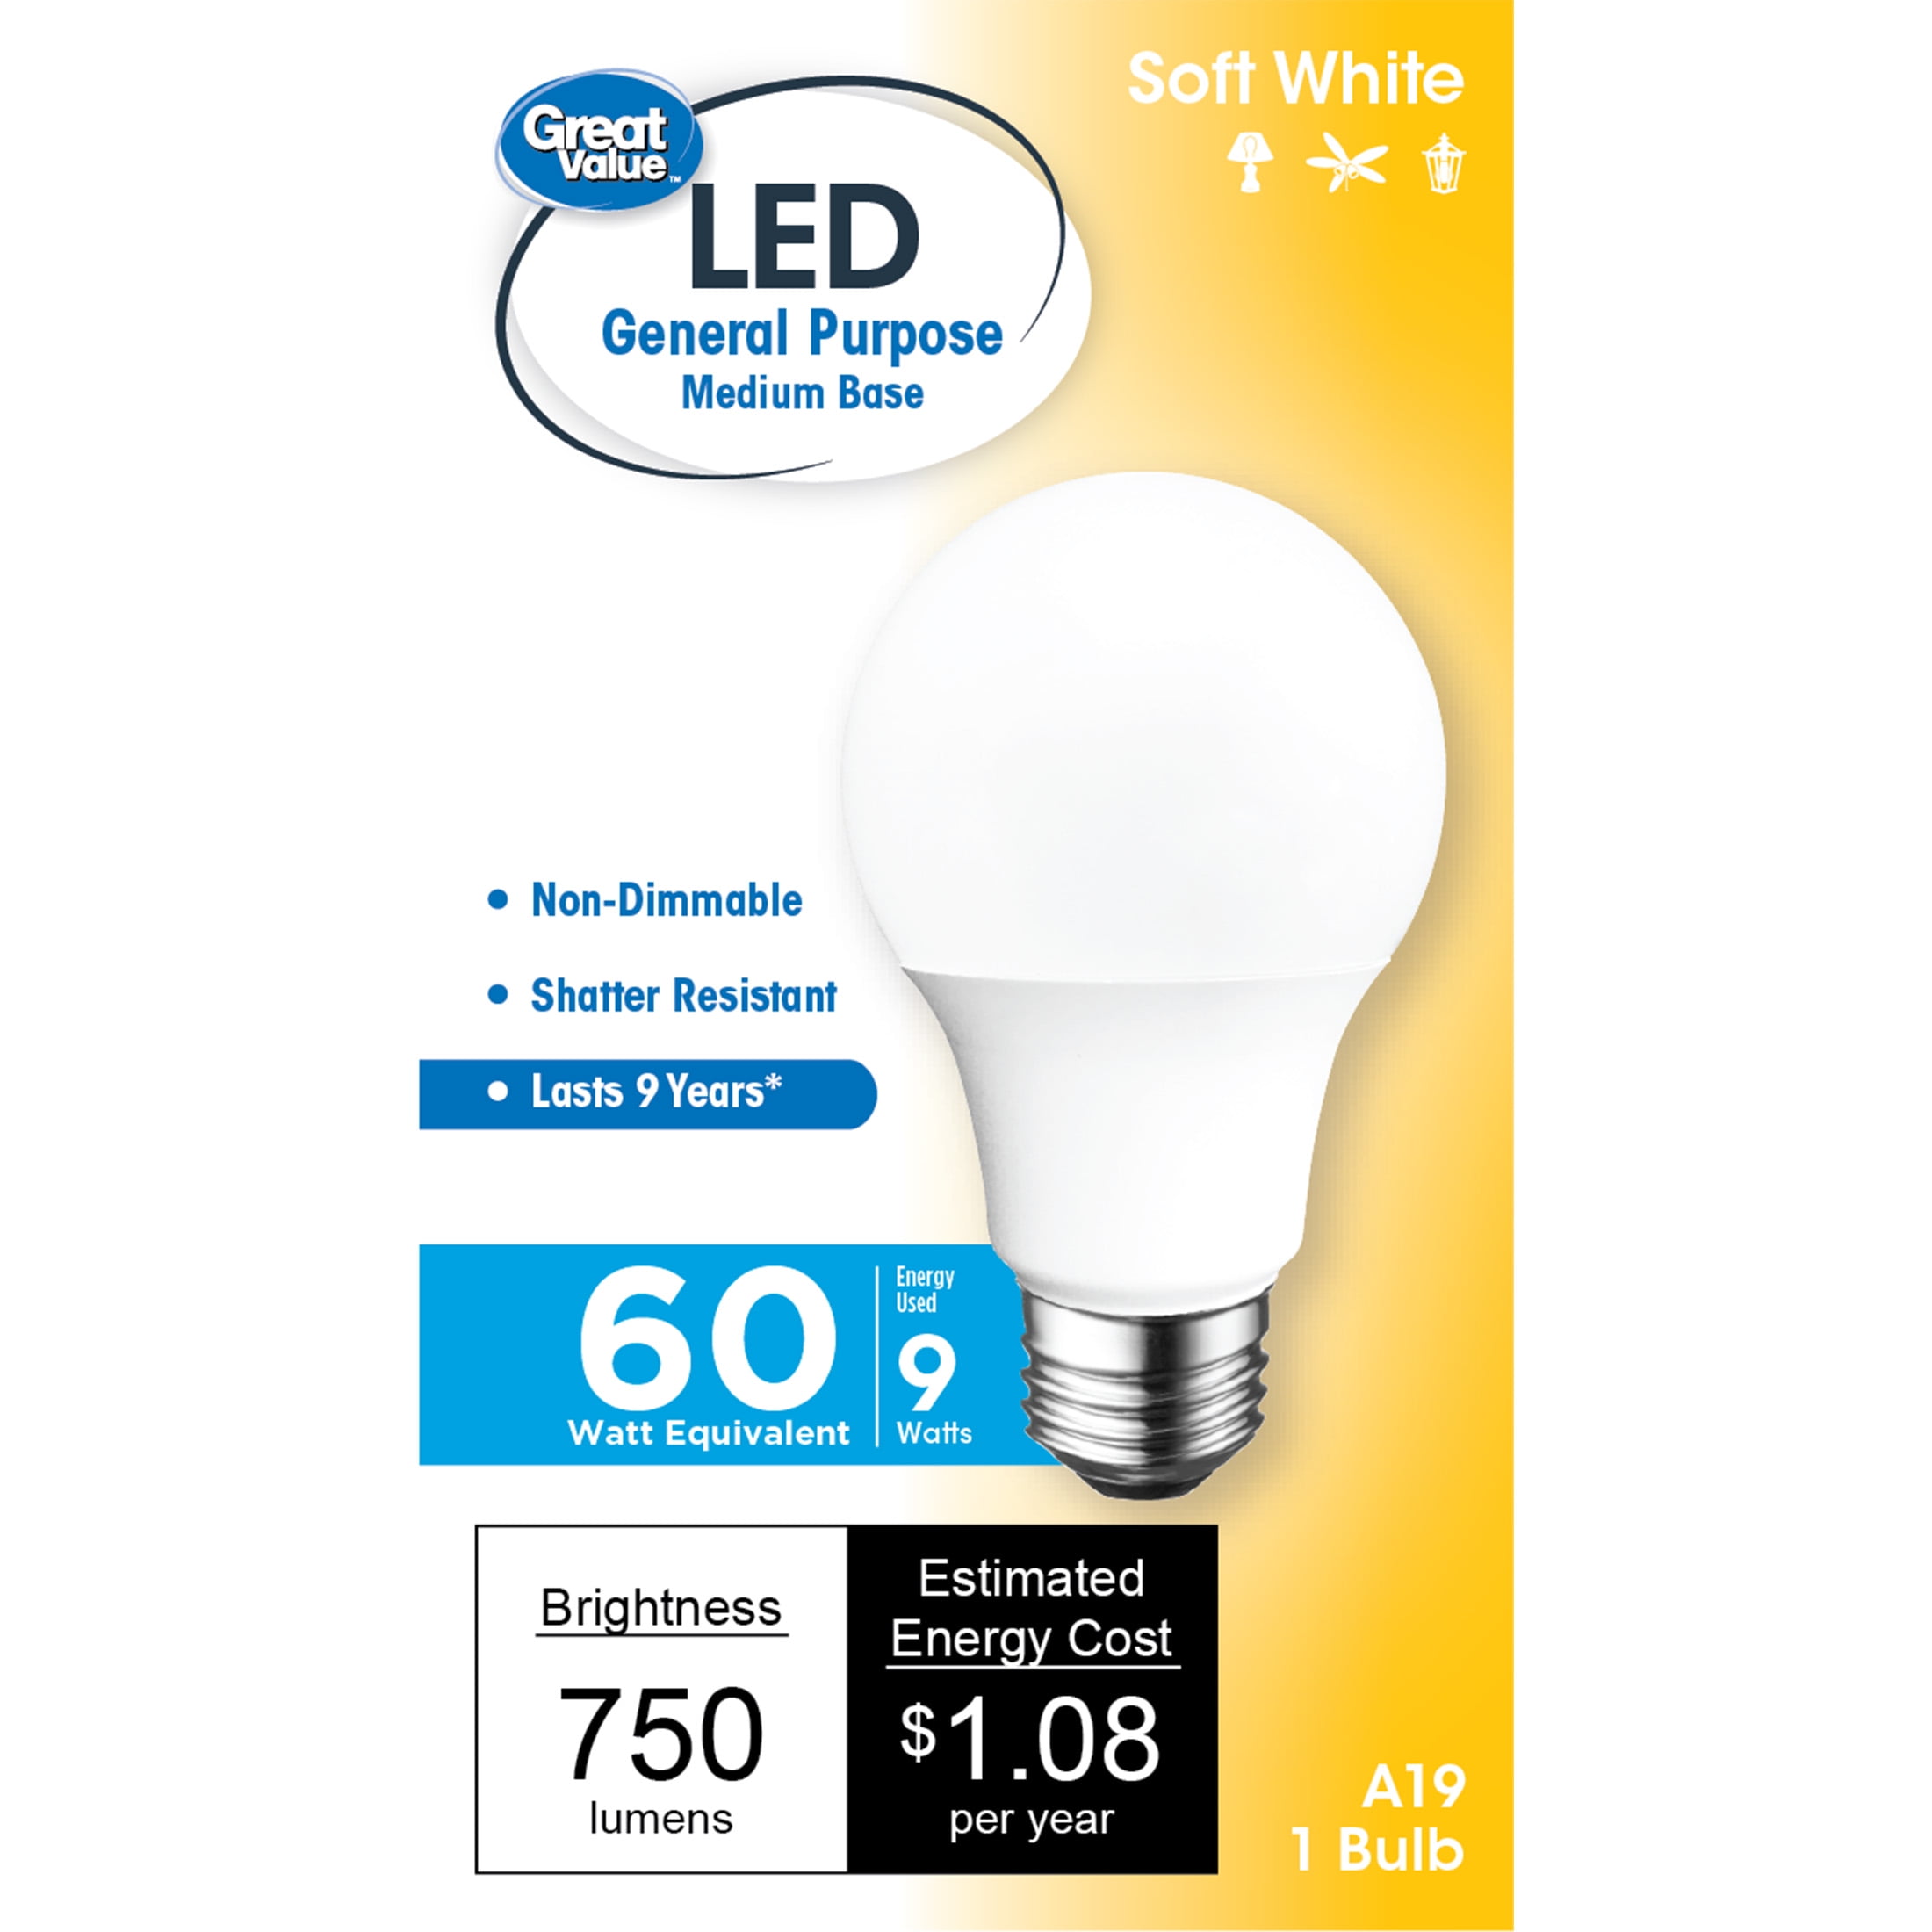 Great Value LED Light 9W (60W Equivalent) A19 General Purpose Lamp E26 Medium Base, Non-dimmable, Soft White, 1-Pack -